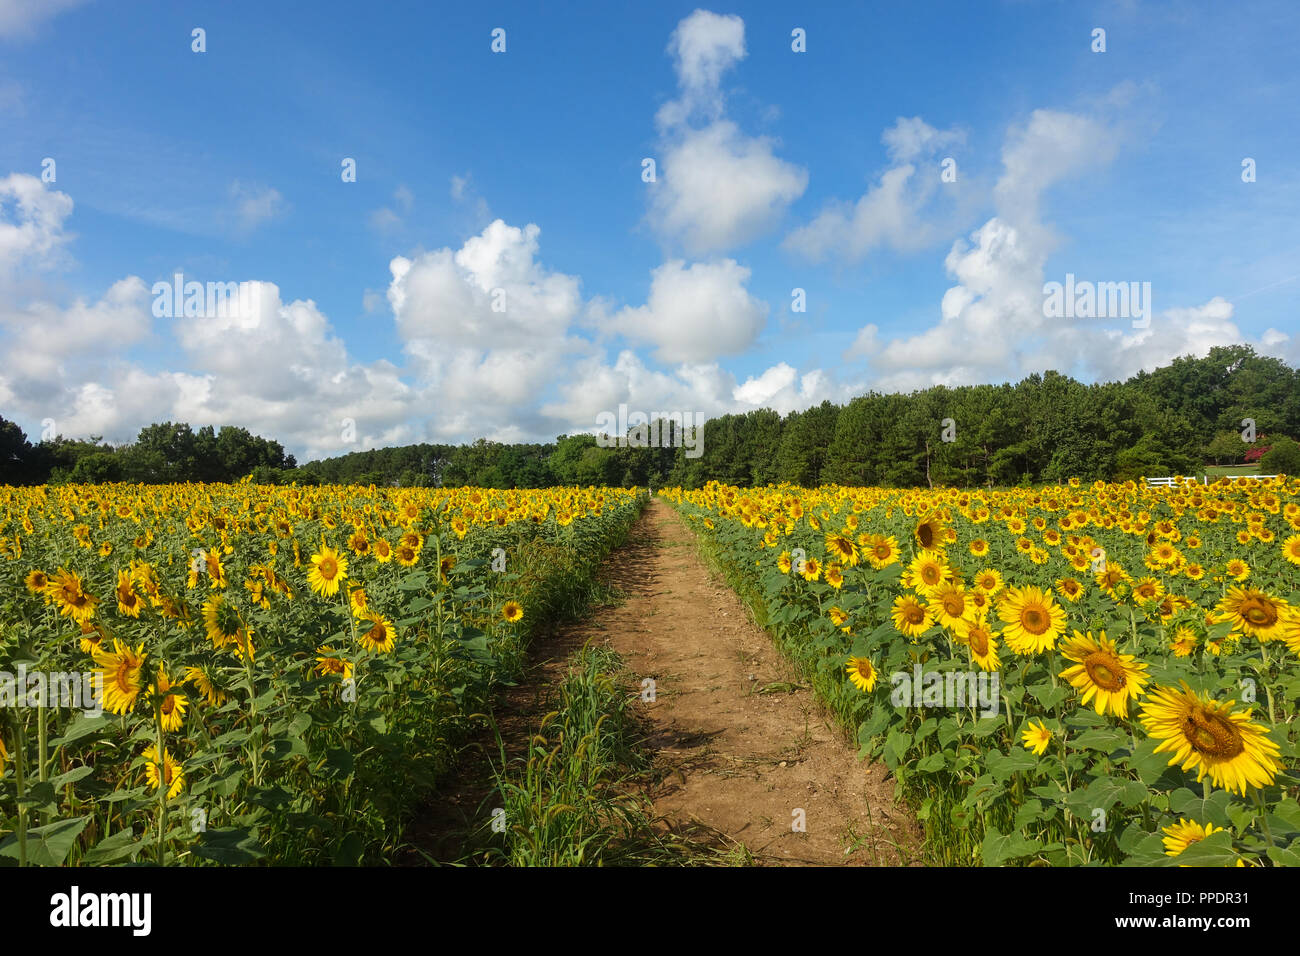 A dirt road leads through a sunflower field in summer underneath a blue sky and clouds Stock Photo